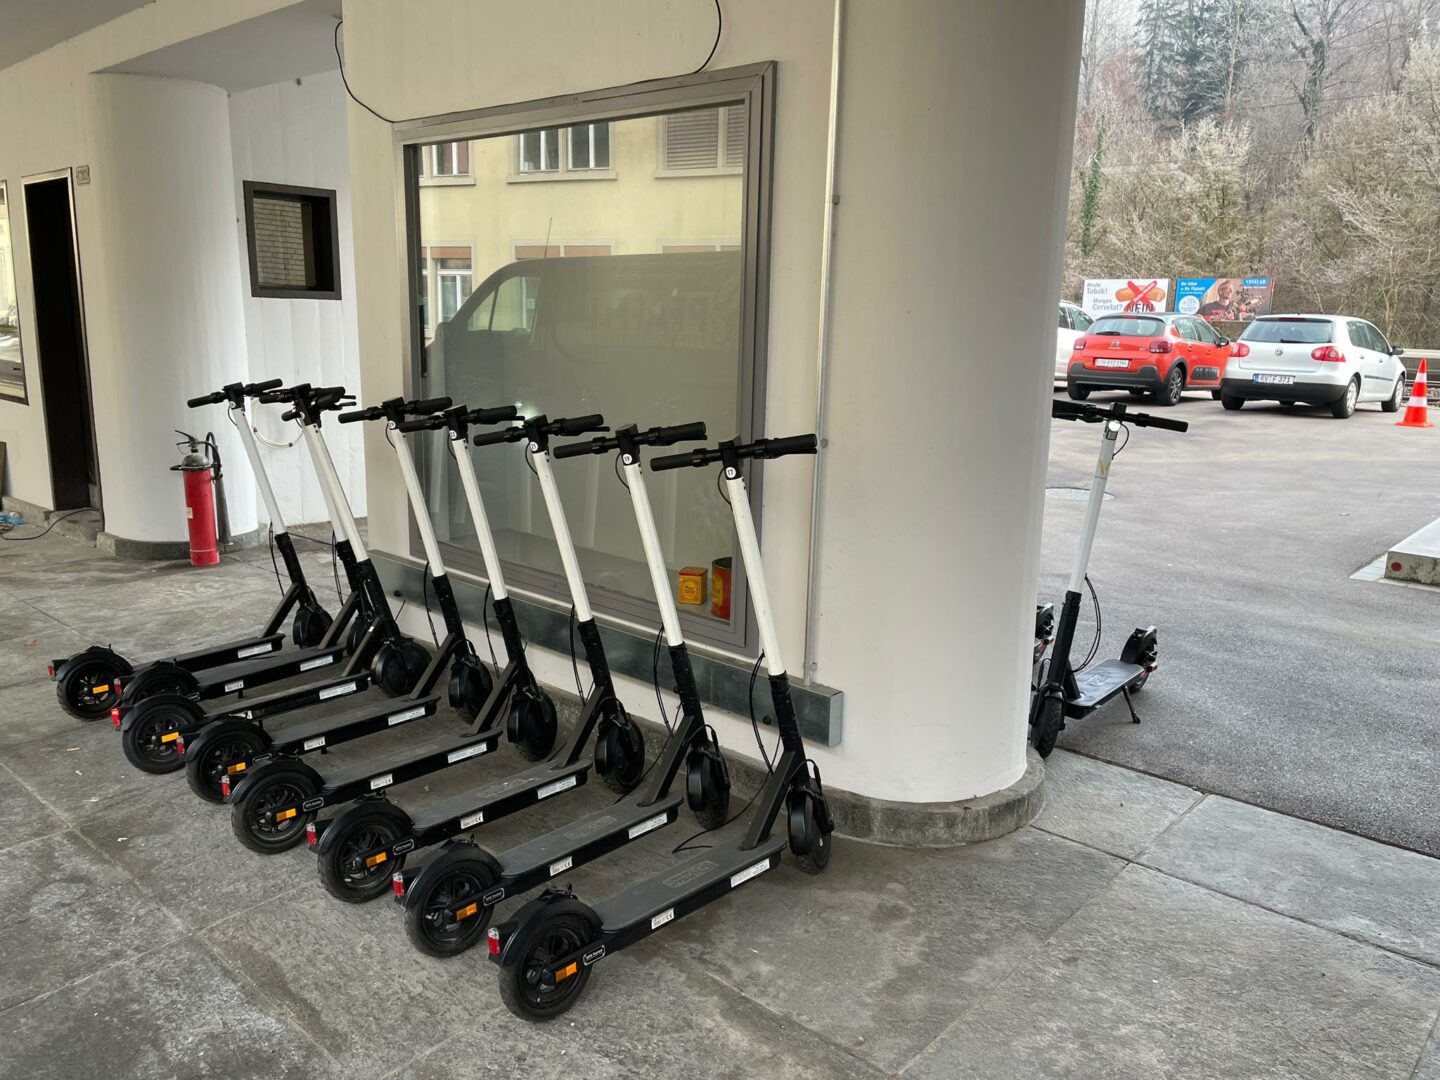 The Valley e-Scooter station